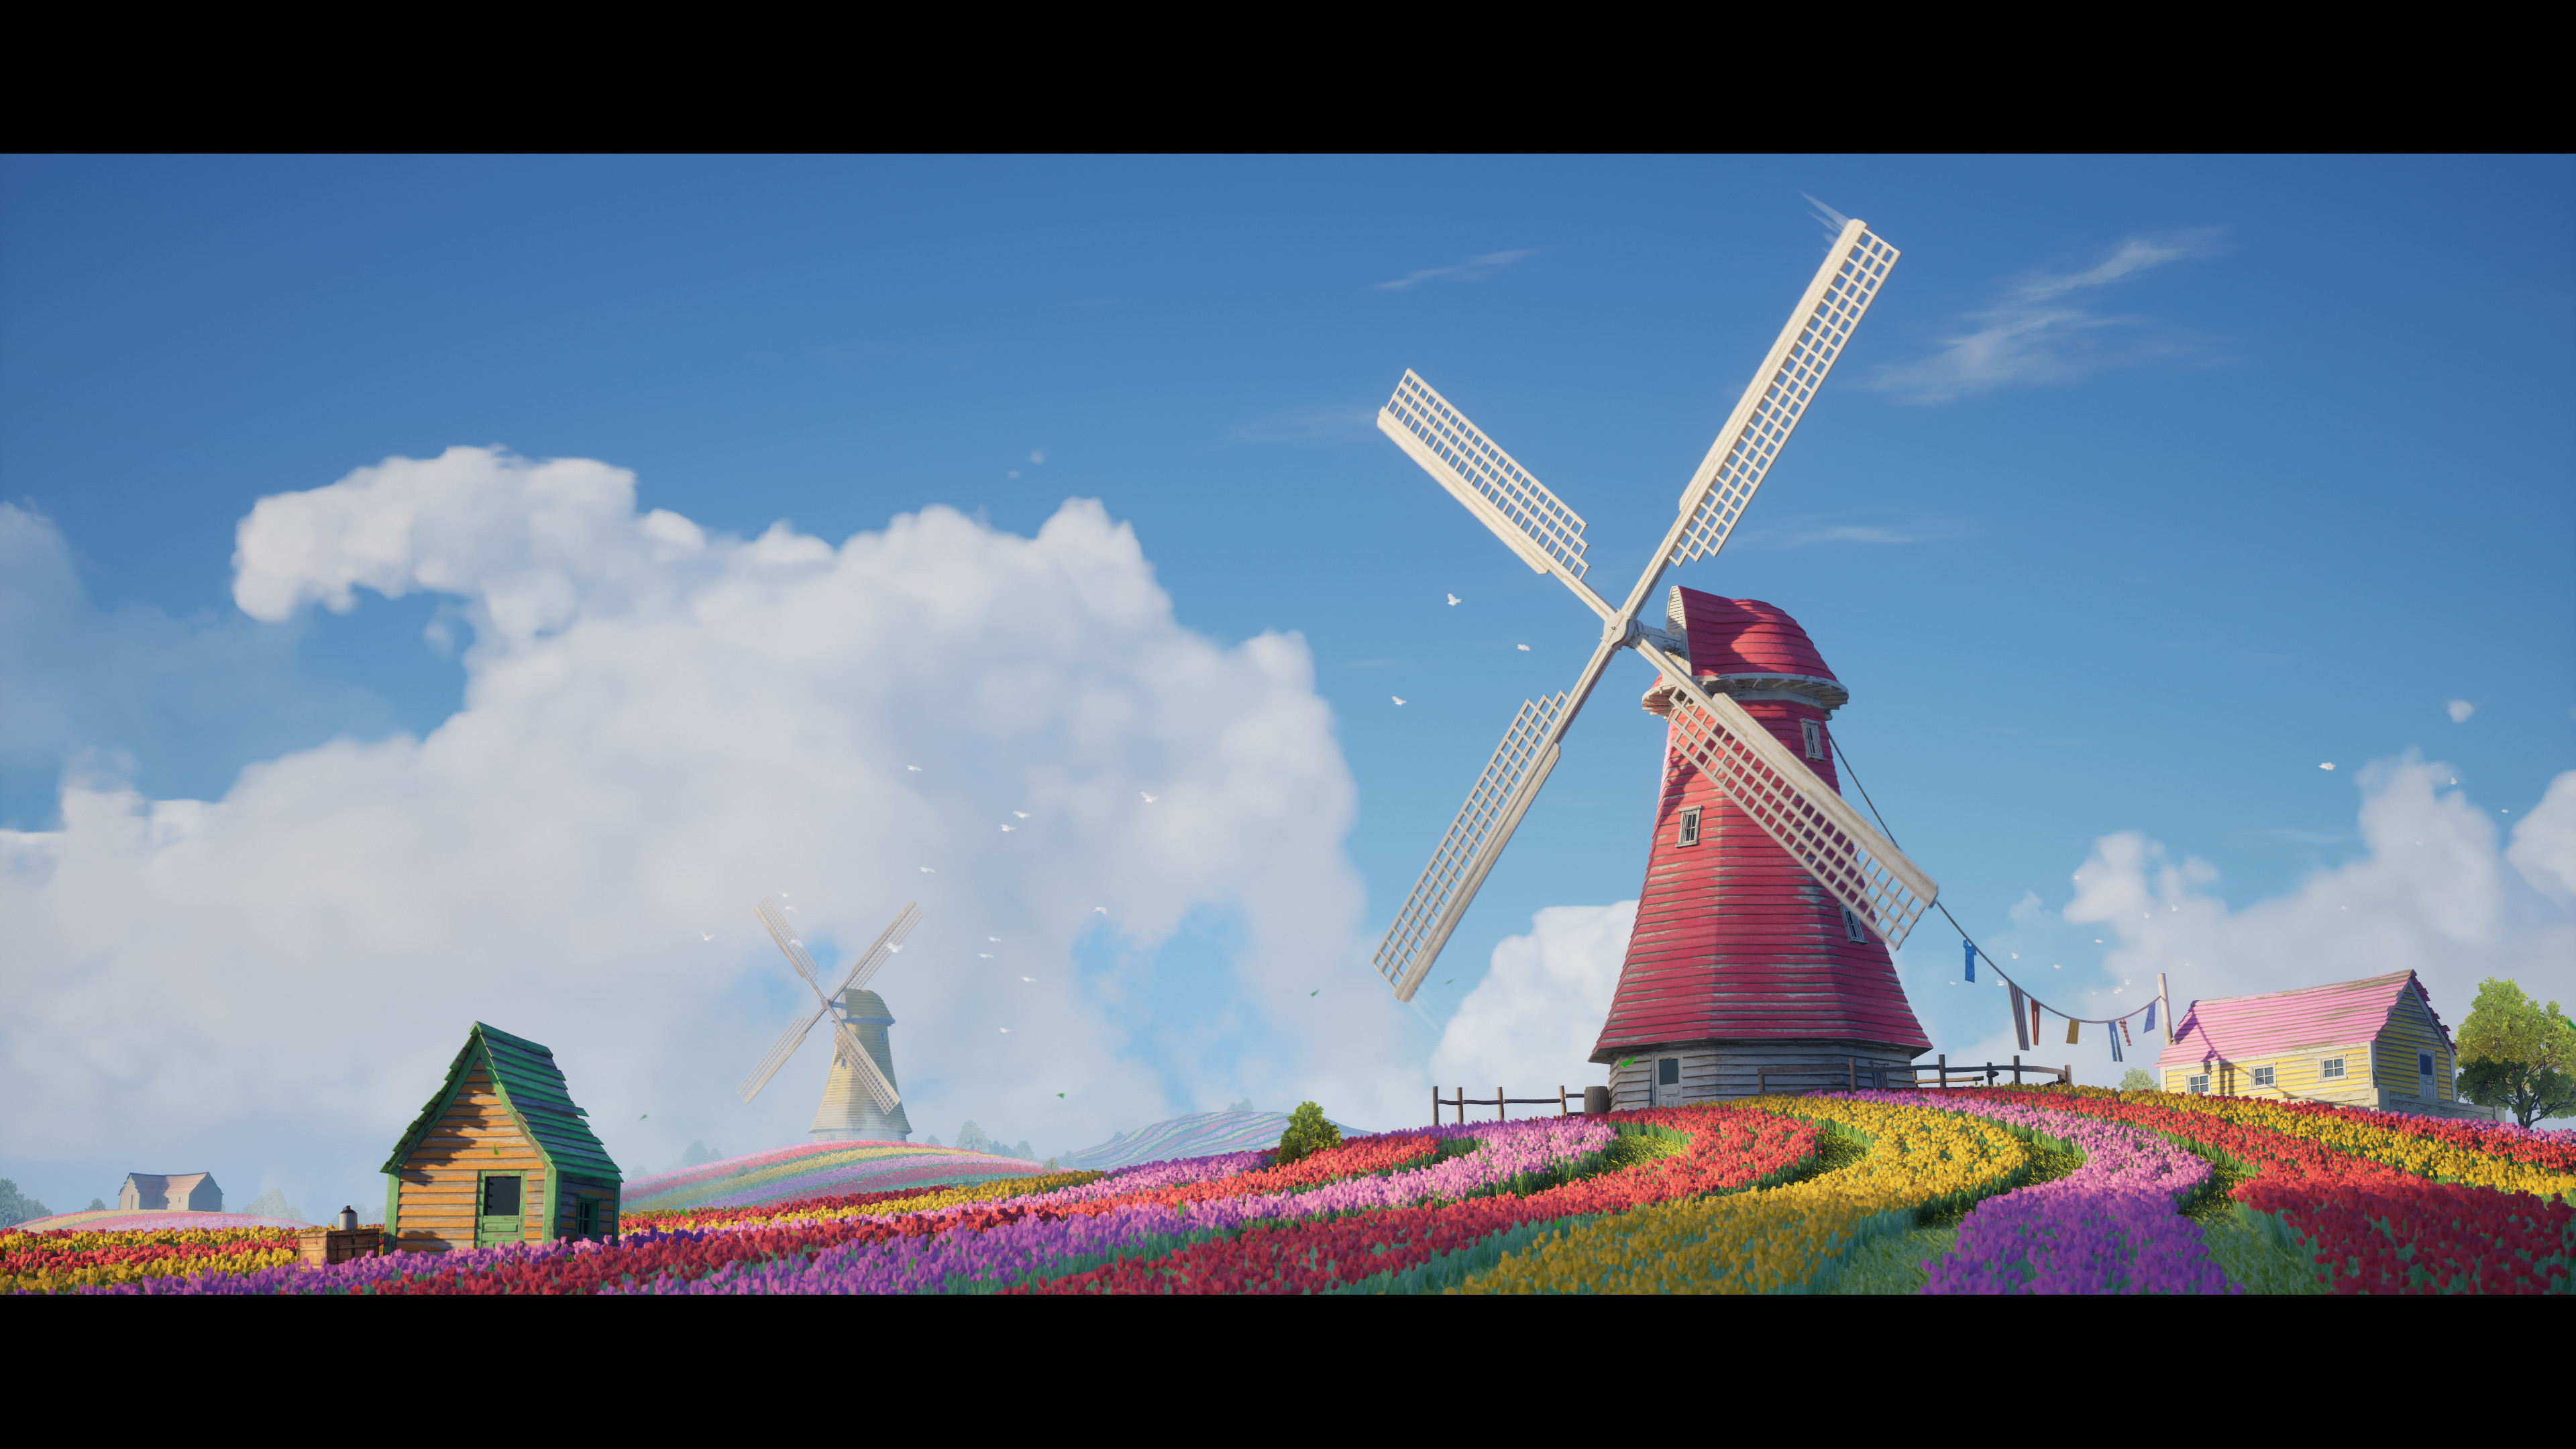 General 3840x2160 James Arkwright drawing windmill field tulips clouds sky flowers colorful sunlight house environment digital art CGI